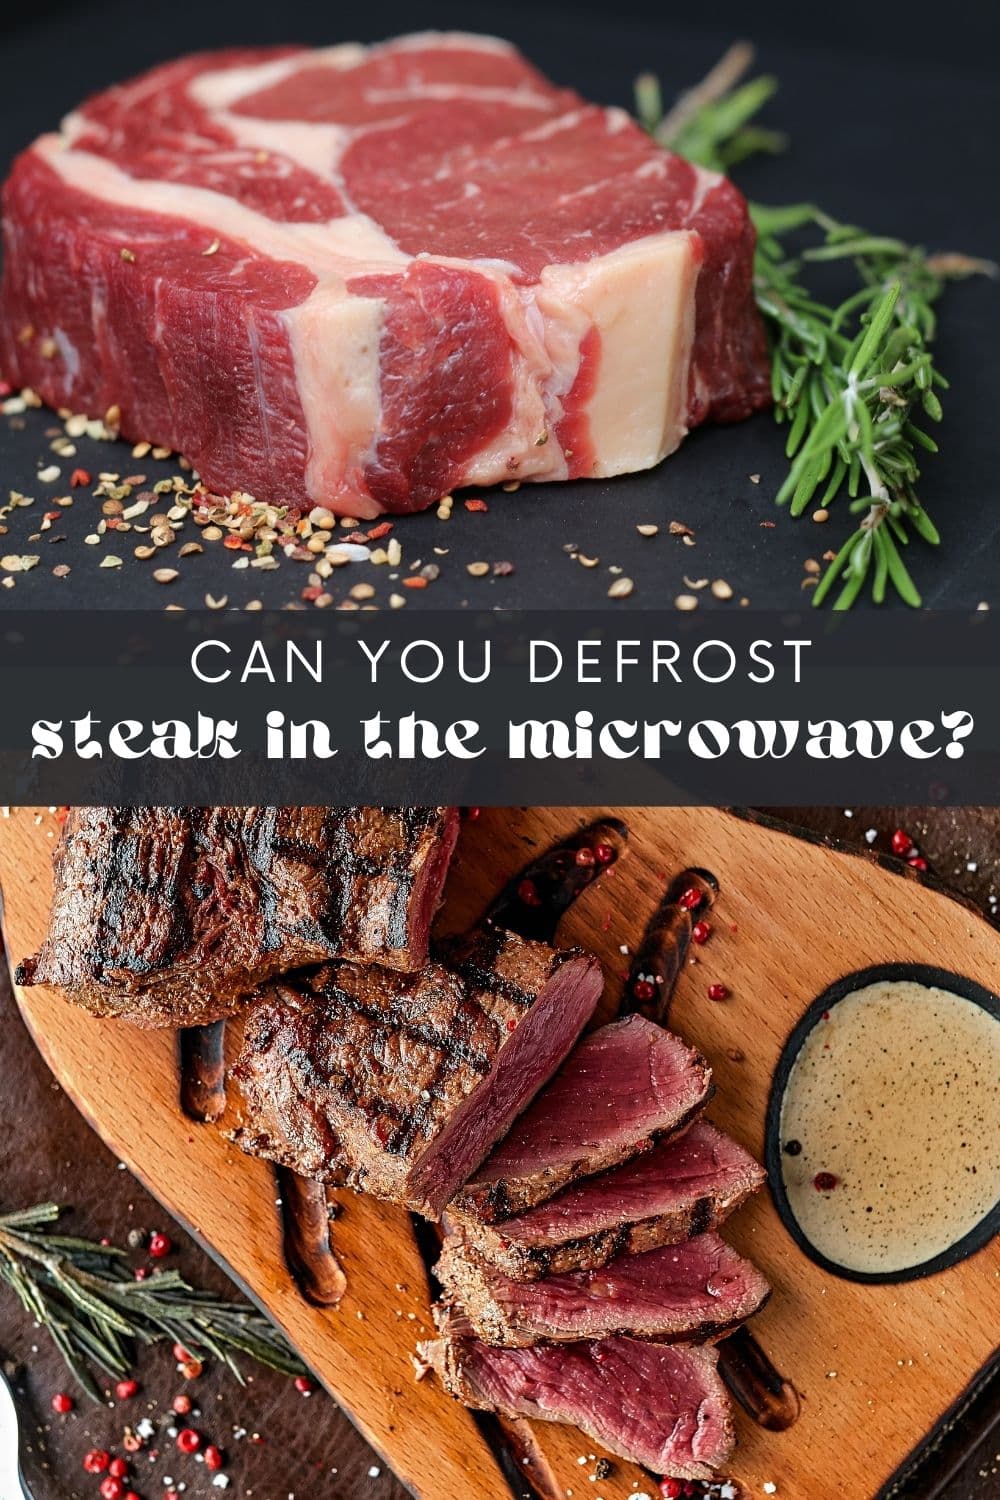 There's nothing more disappointing than taking out a steak for dinner only to realize you forgot to thaw it out. But don't worry; there's an easy way to thaw steak! Using a microwave is the most convenient and fastest way to defrost your steak - without compromising food safety.